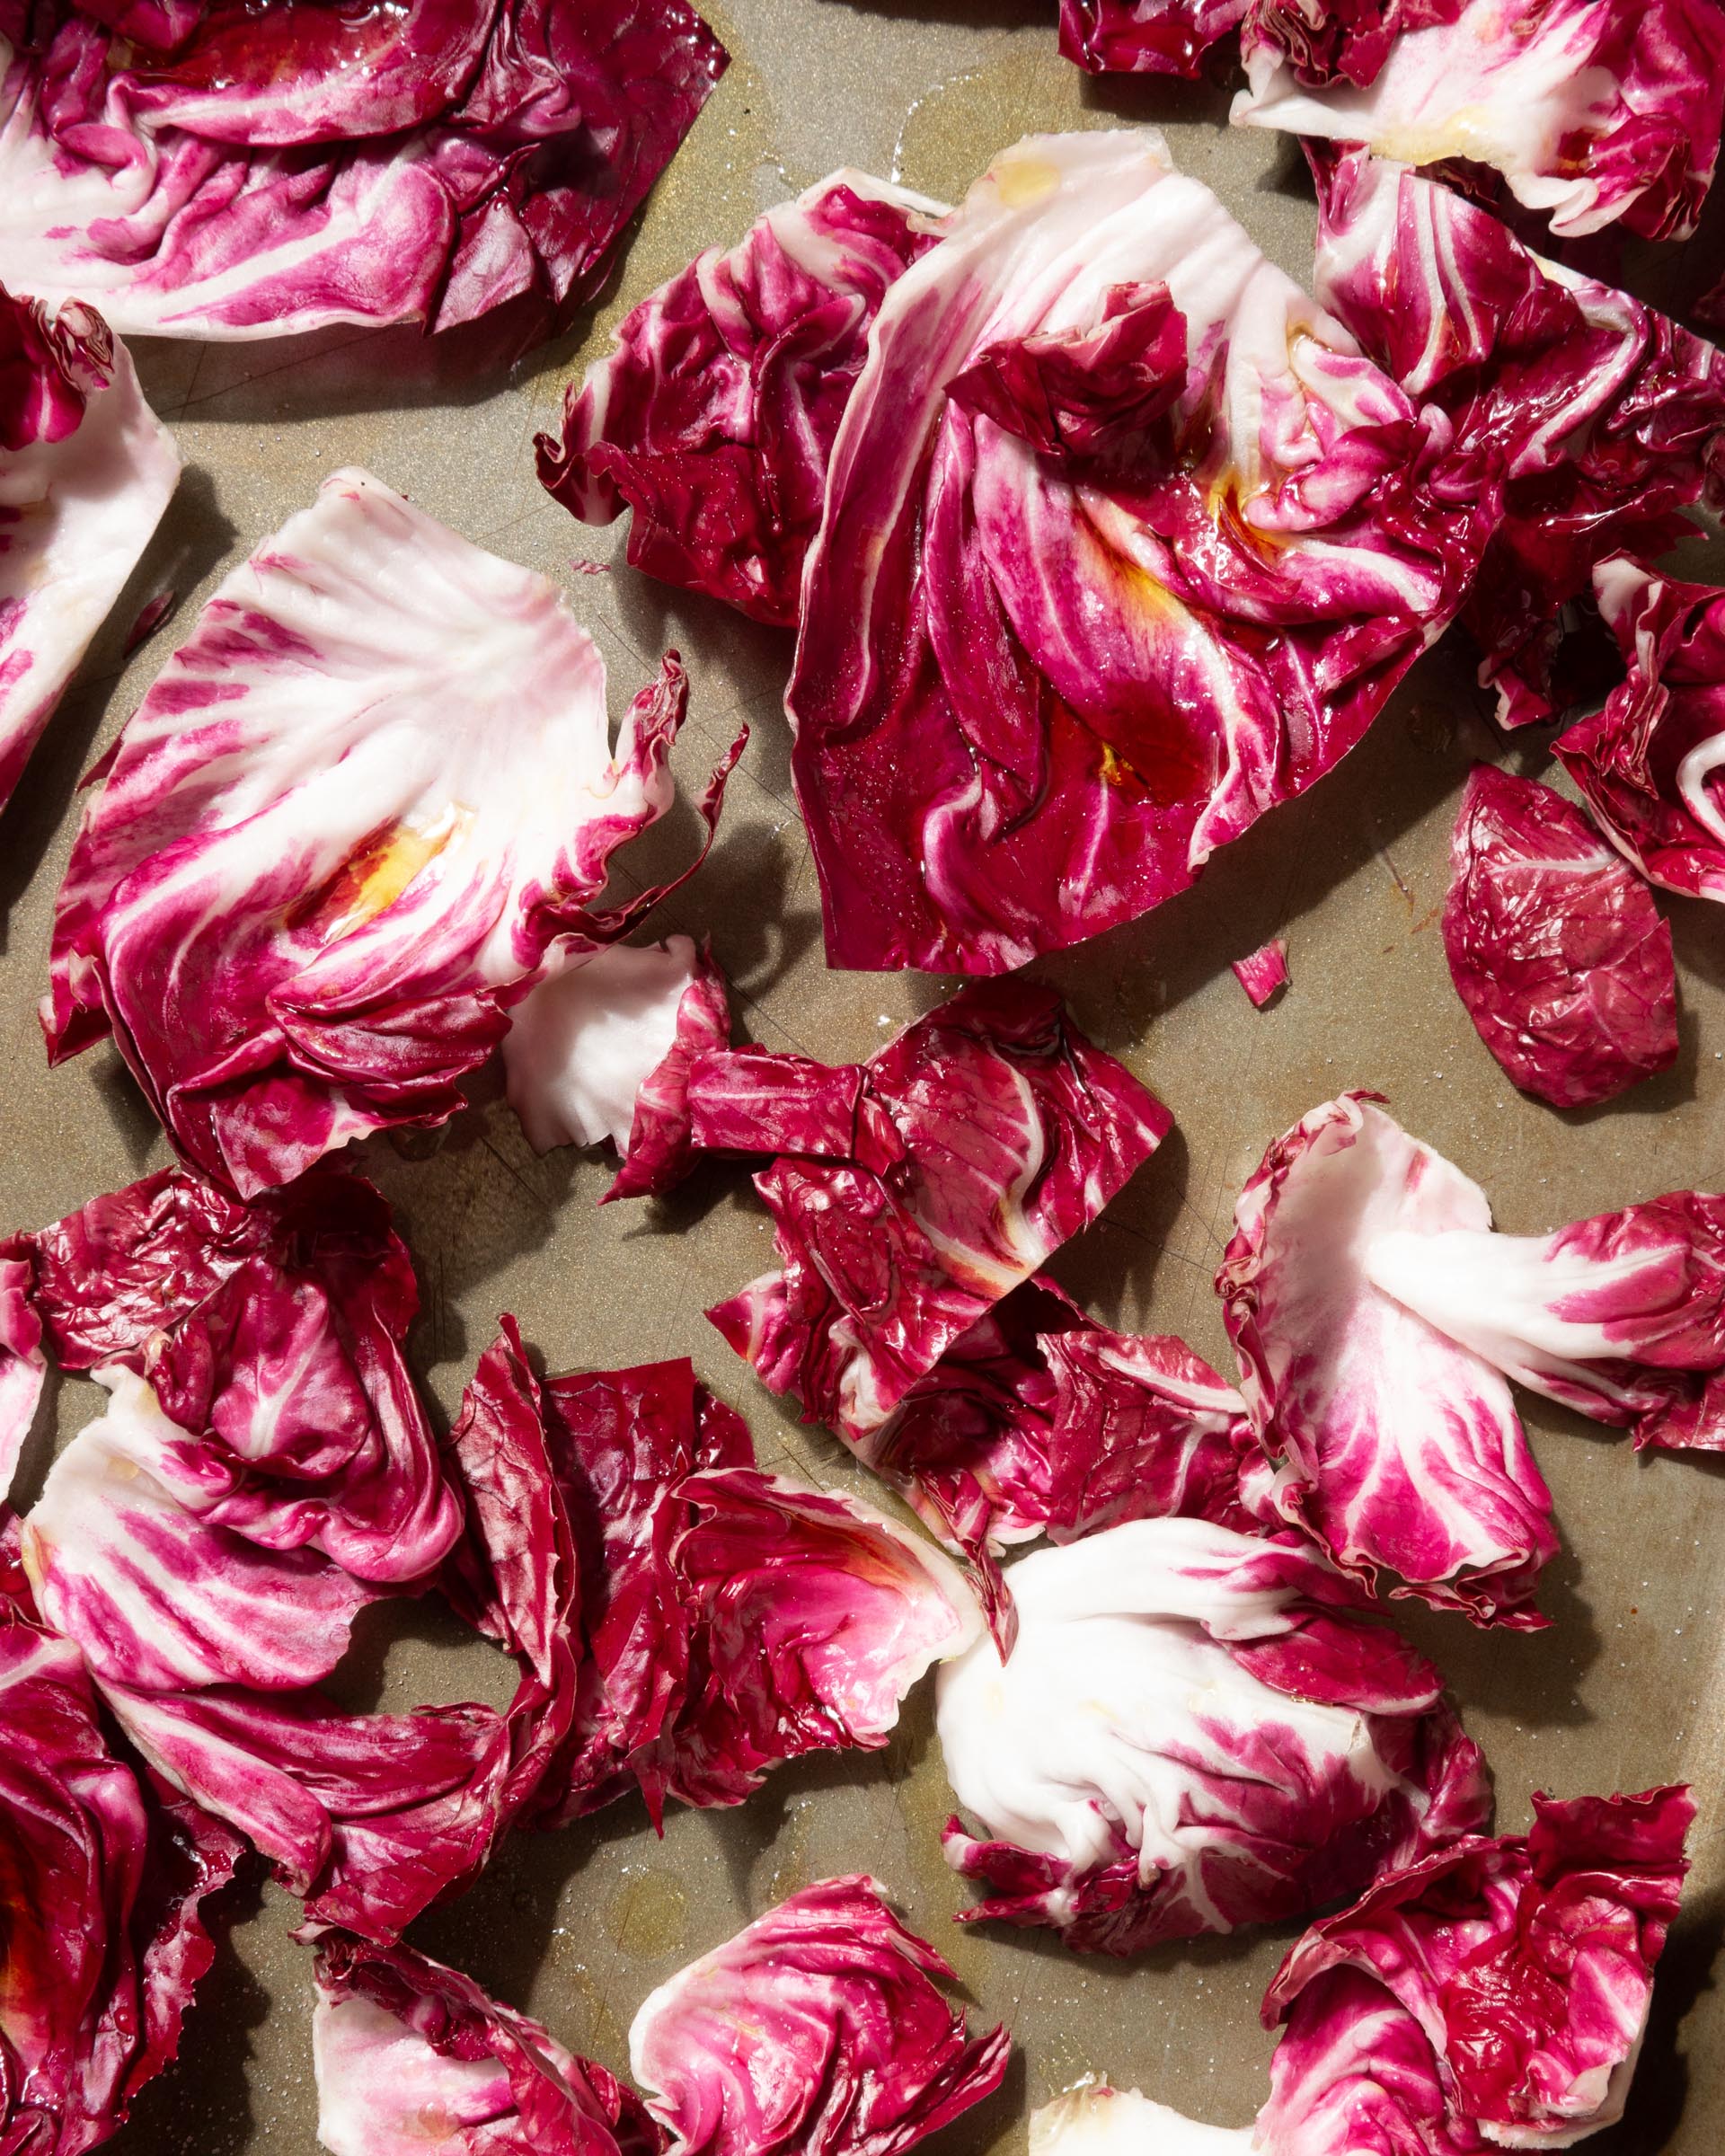 radicchio getting ready to be roasted